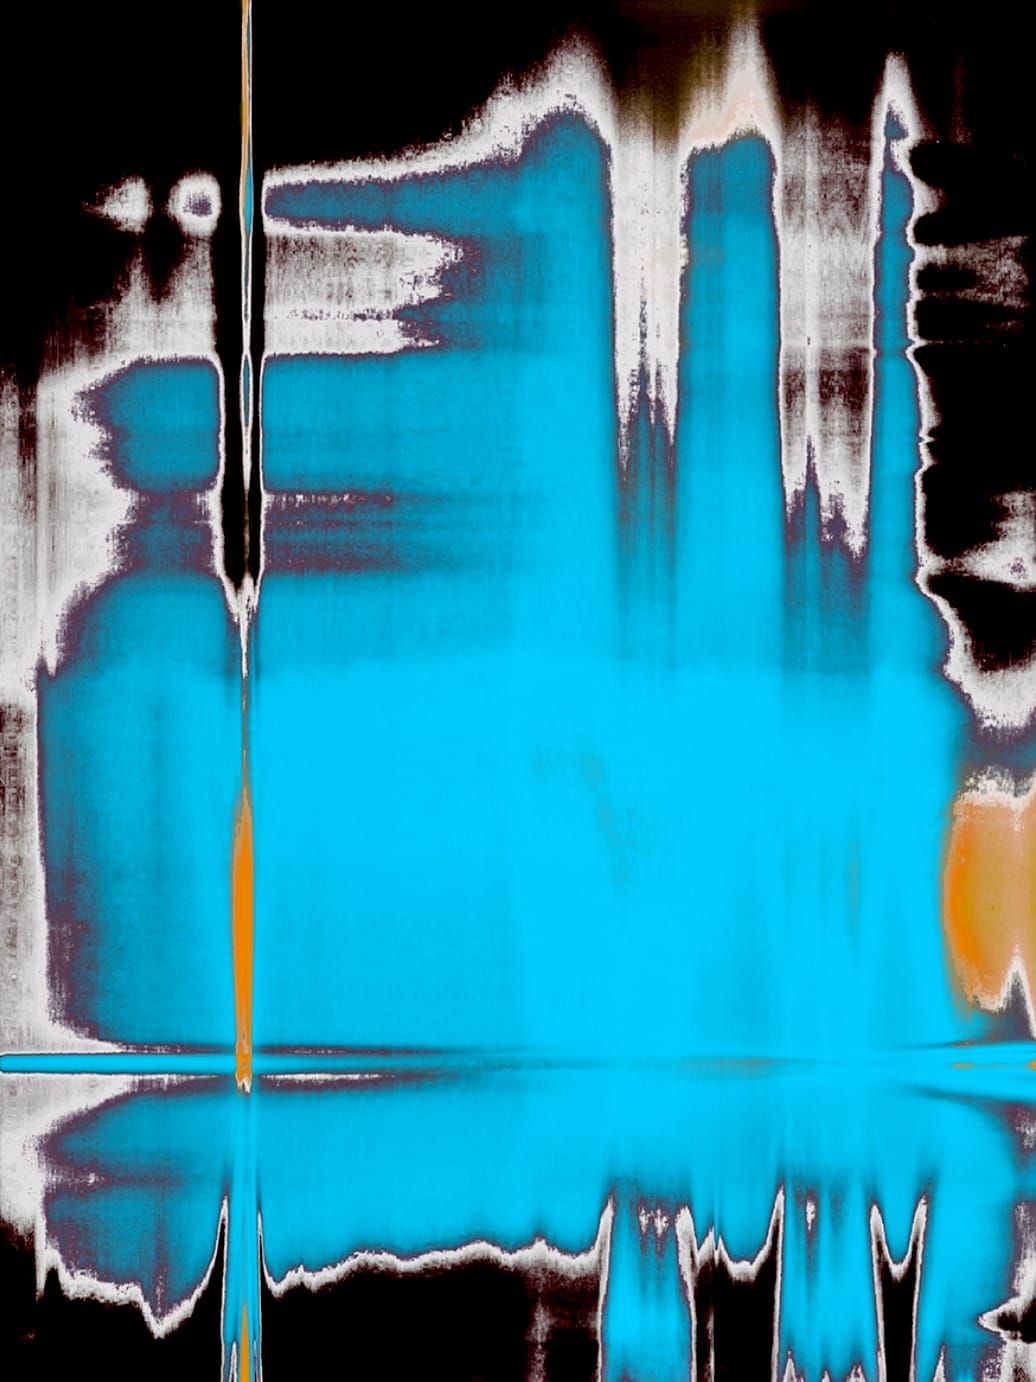 Photography, Scanography by Michael Monney aka acylmx, Abstract Image in Blue